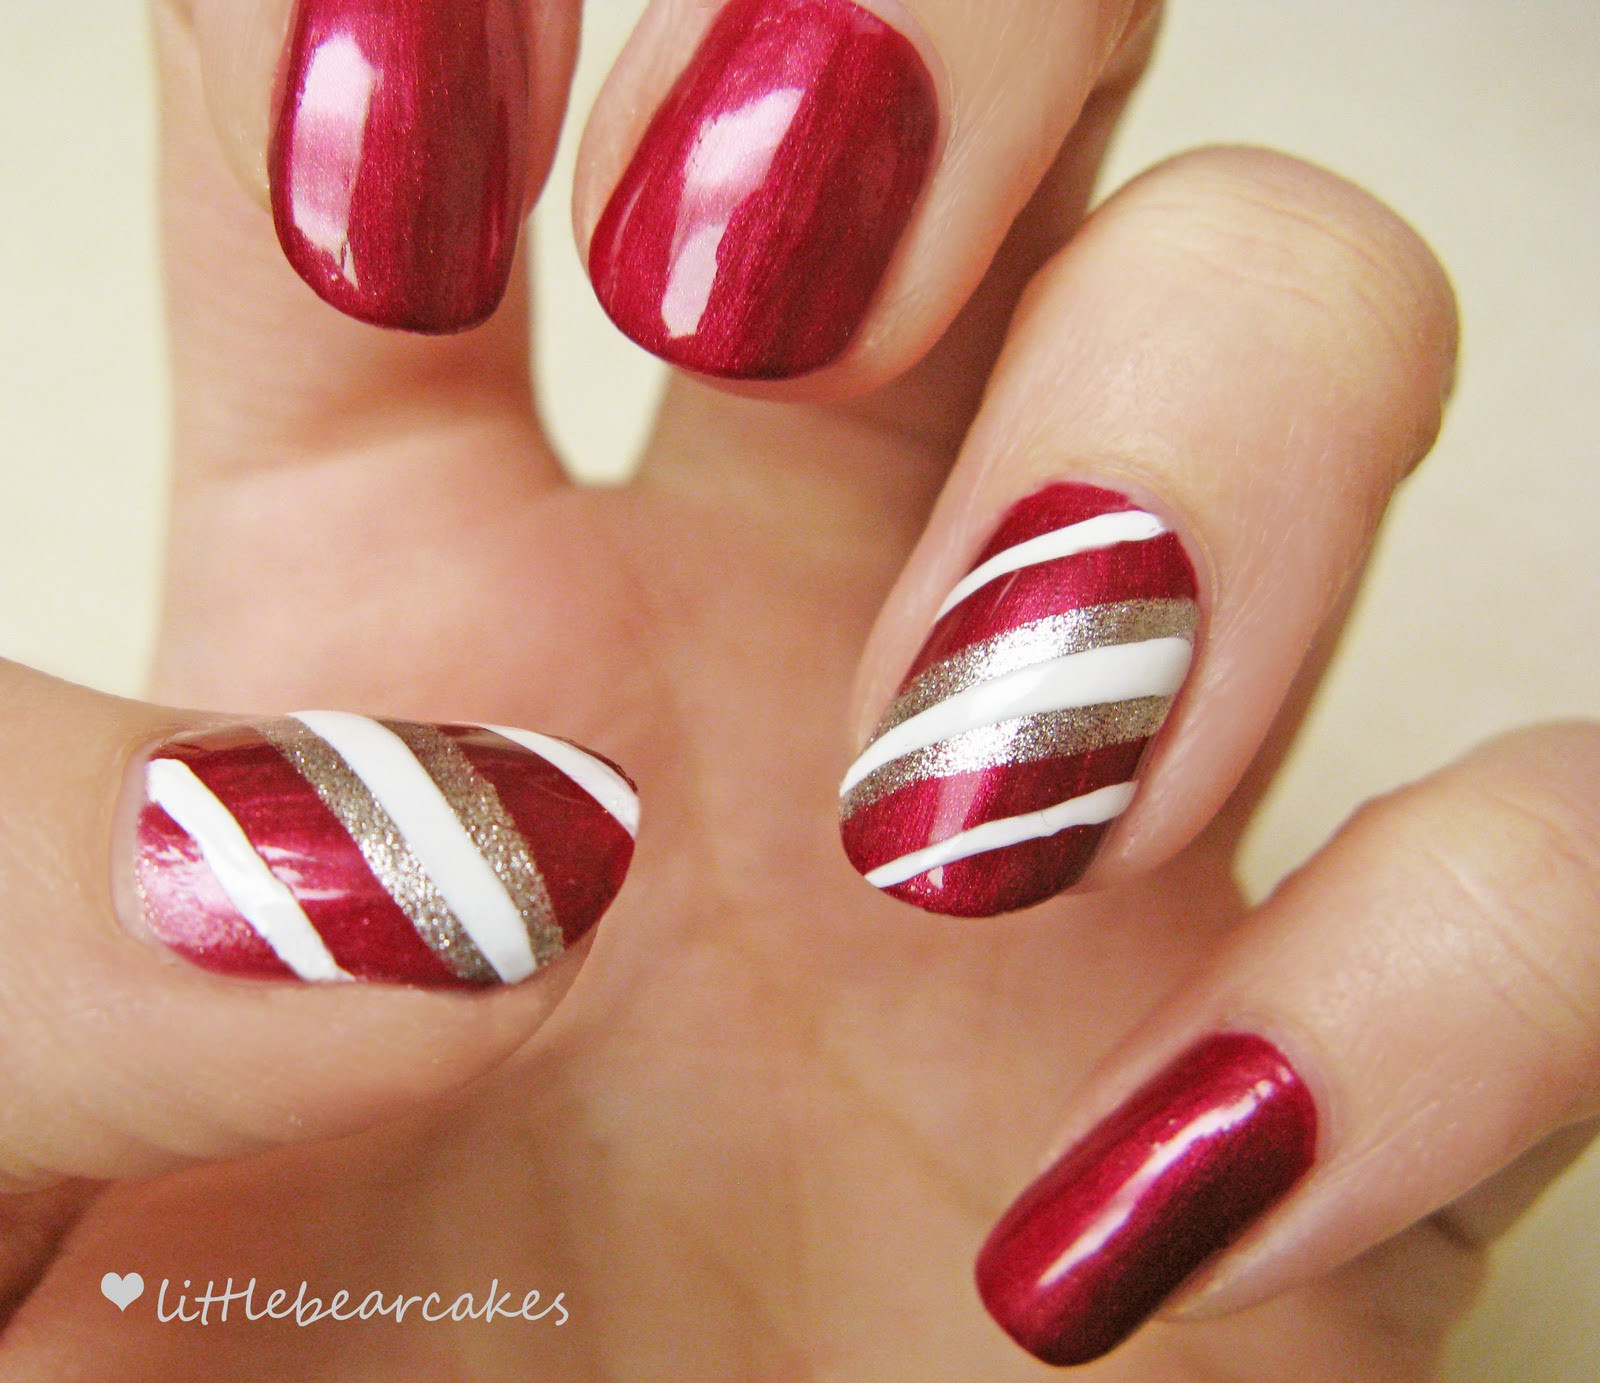 Christmas Nails Candy Cane
 Nails Candy Cane – Done well these can be the icing on